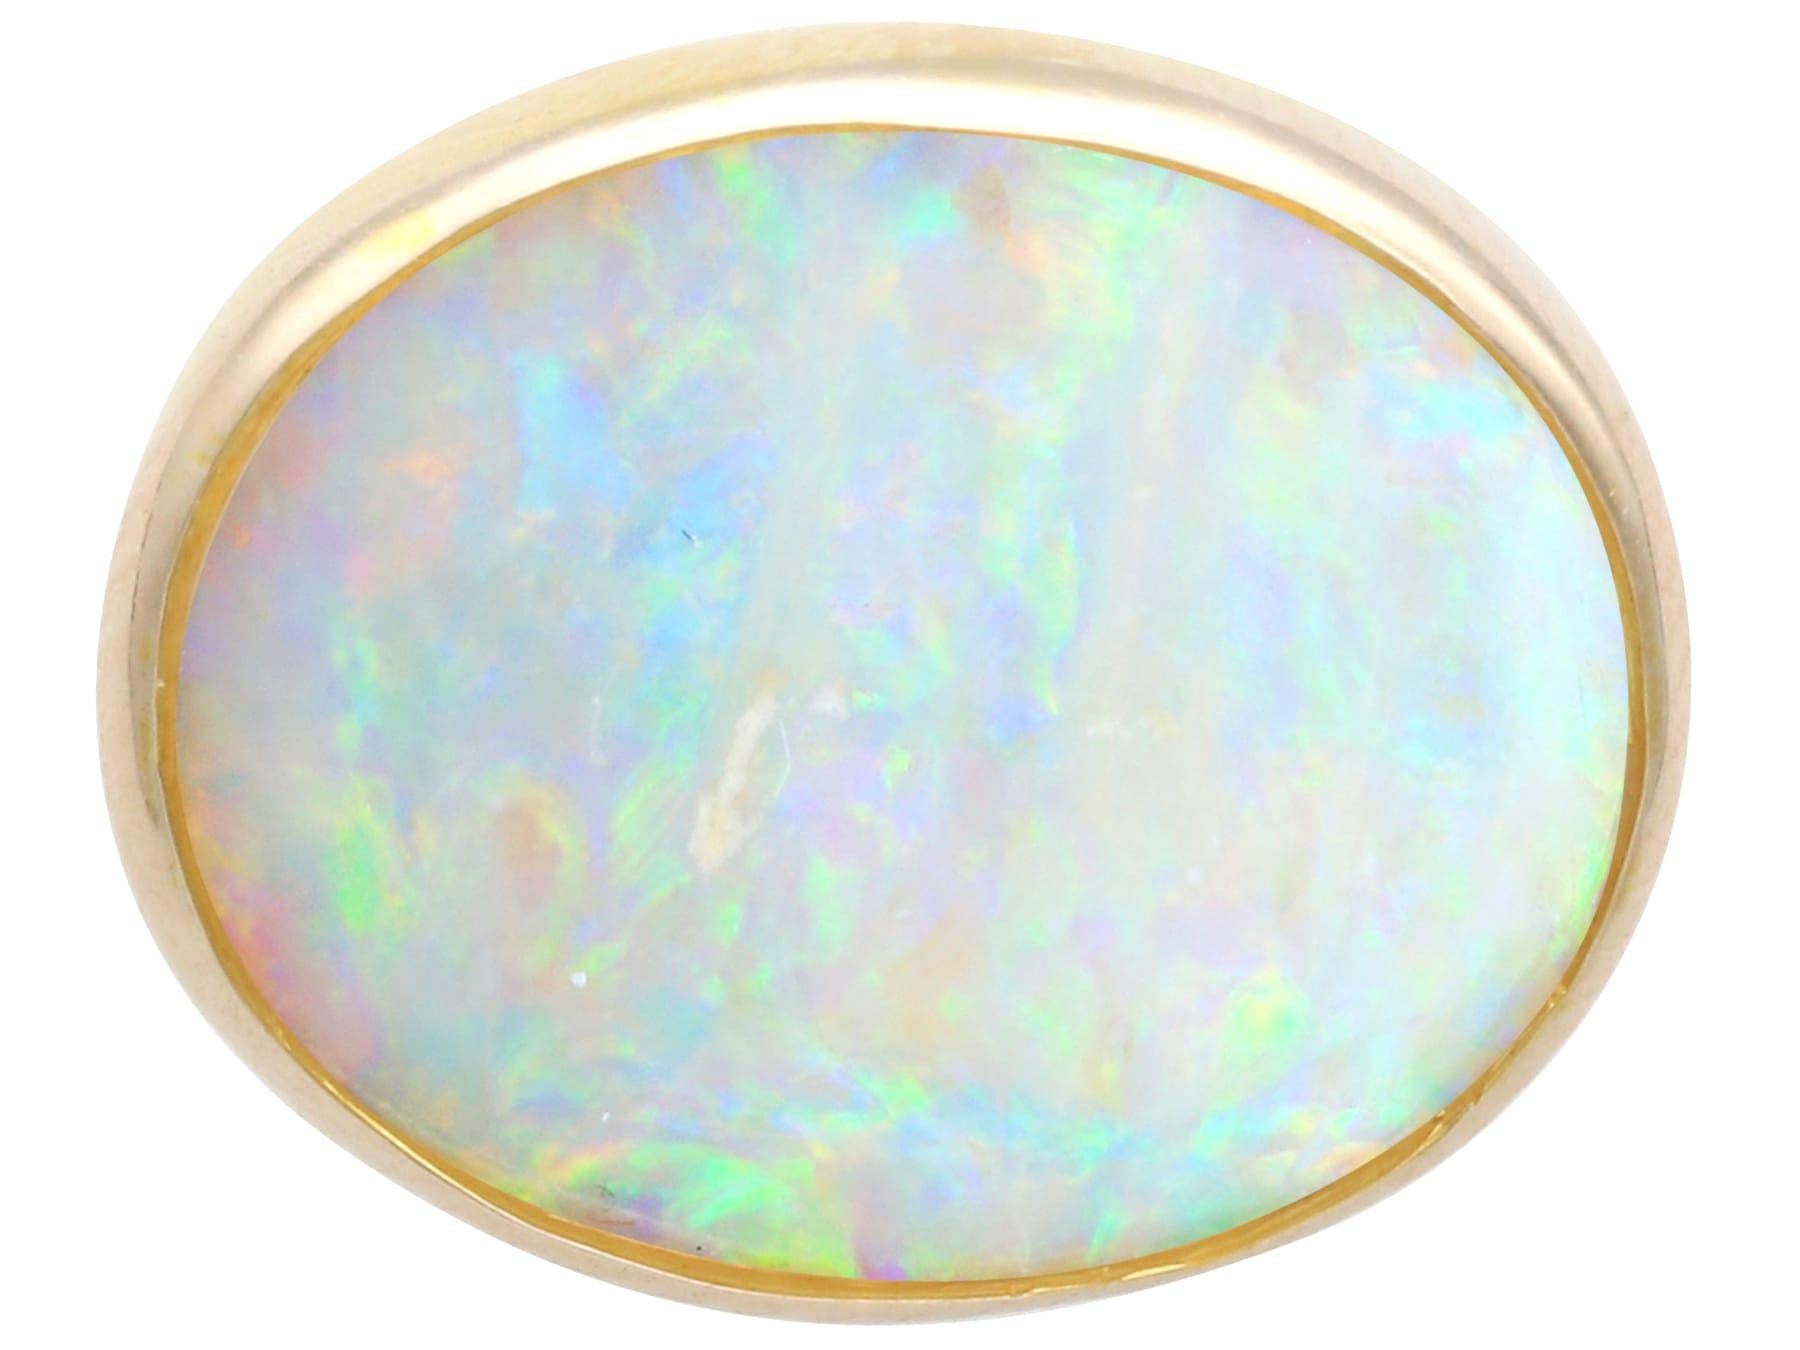 Retro Vintage 1950's 4.51 Carat Opal and 9K Gold Stud Earrings For Sale